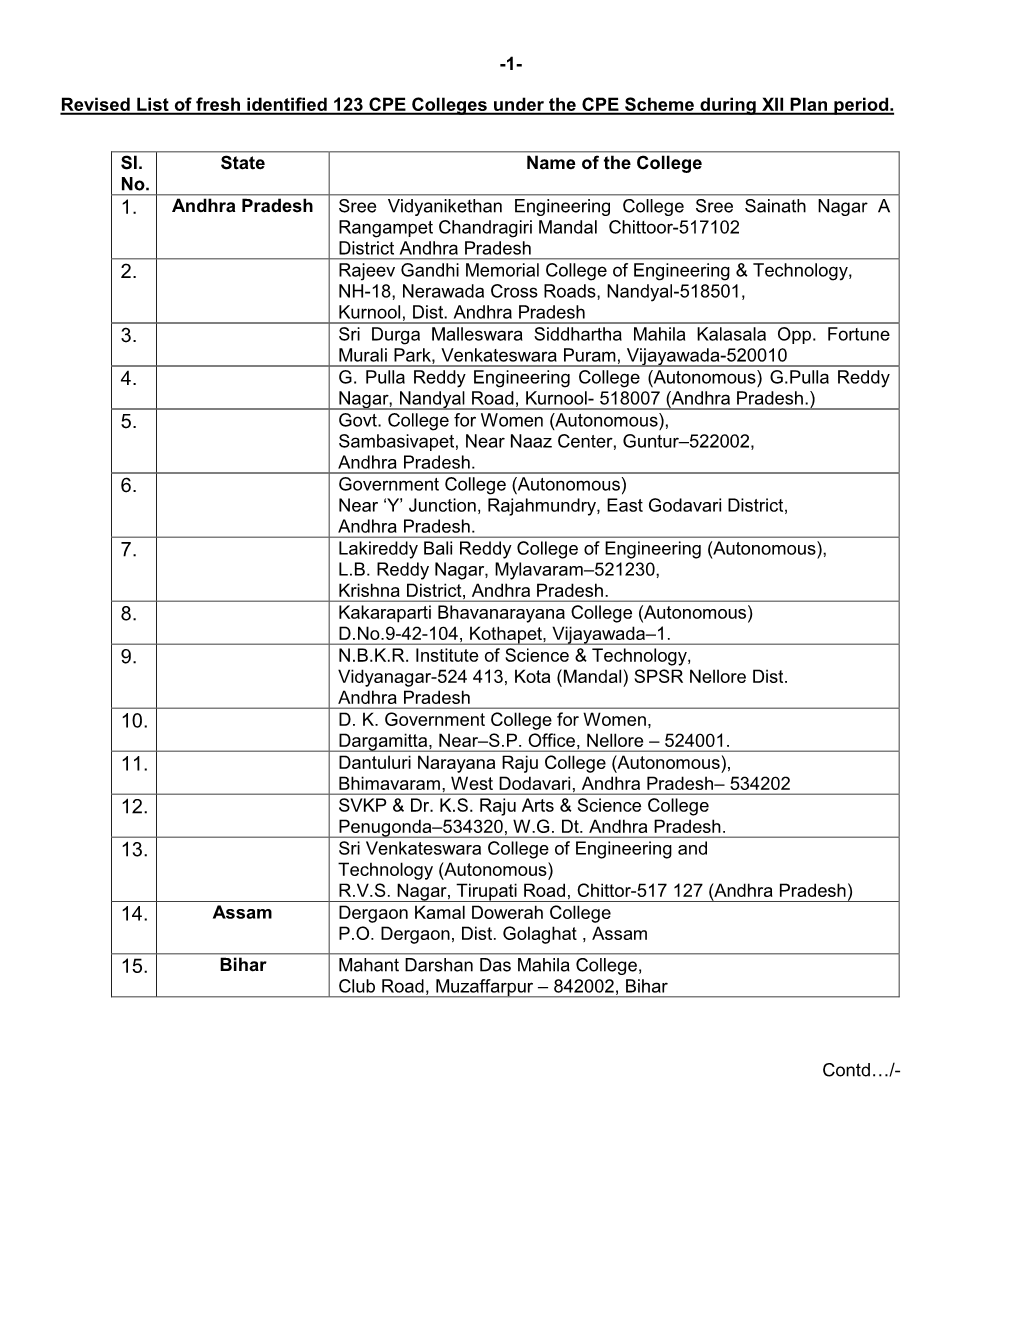 Revised List of Fresh Identified 123 CPE Colleges Under the CPE Scheme During XII Plan Period. Contd…